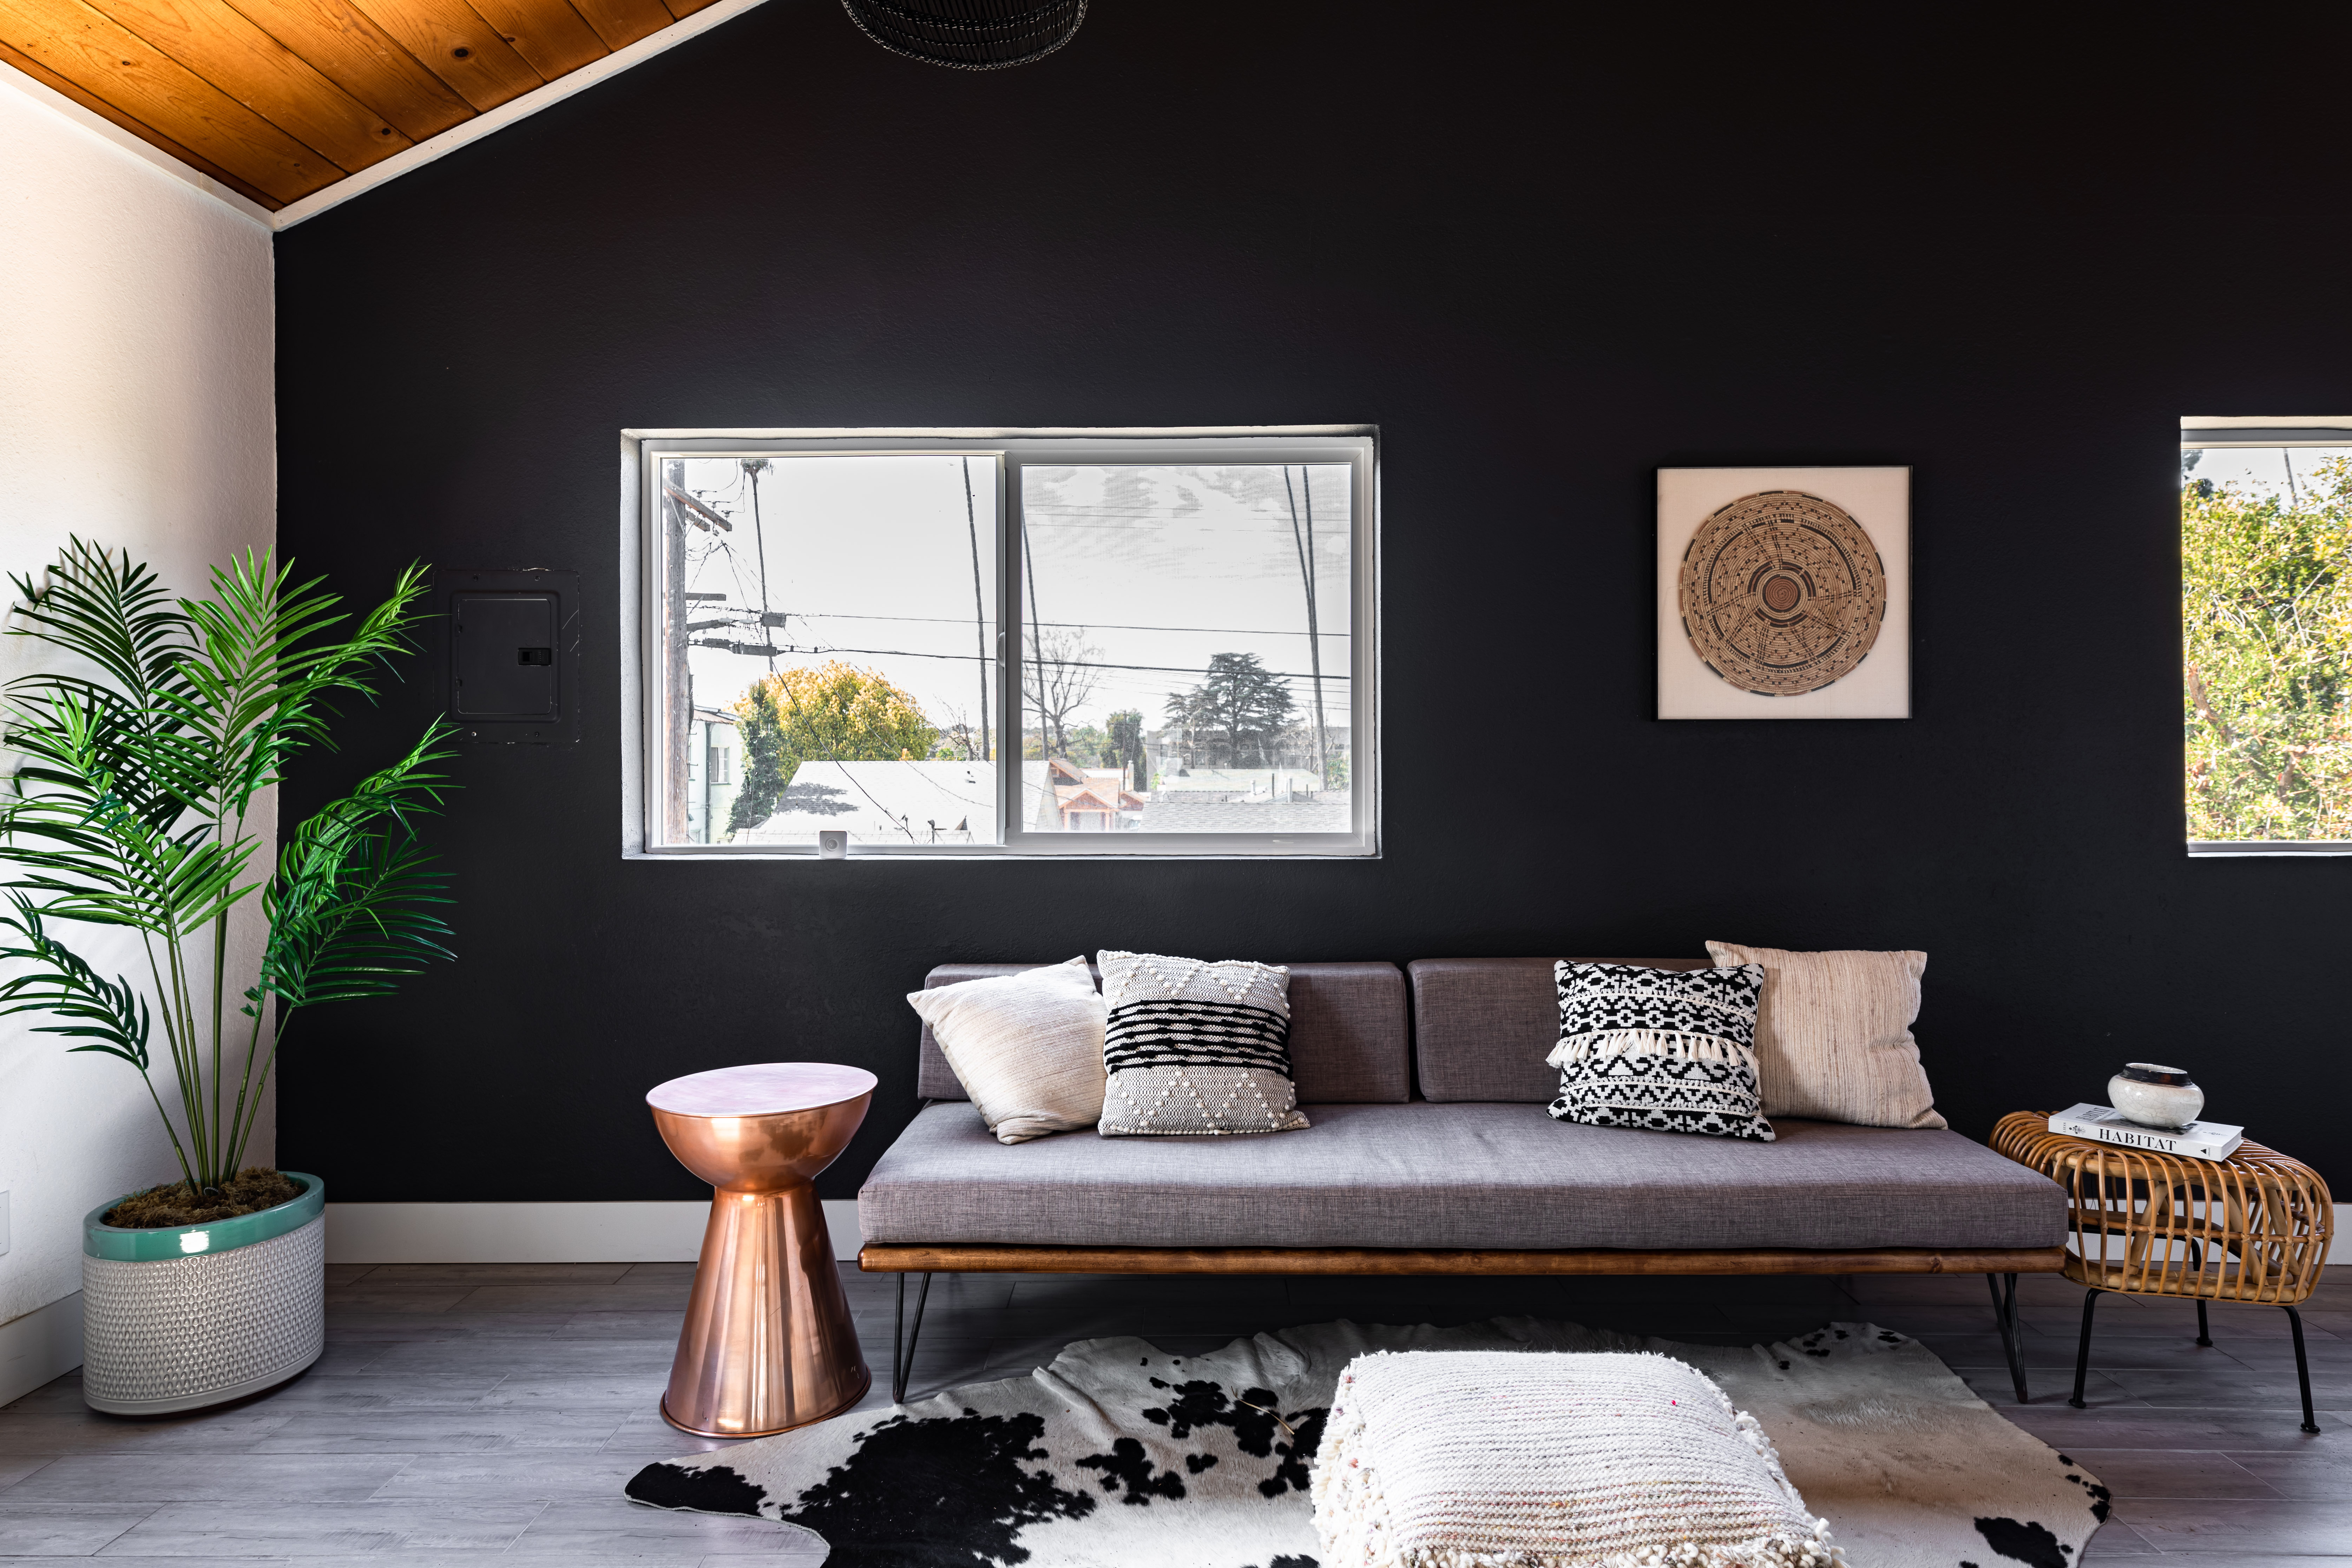 Cozy home with a vintage touch - COCO LAPINE DESIGN  Living room  scandinavian, Minimalist living room, Living room designs